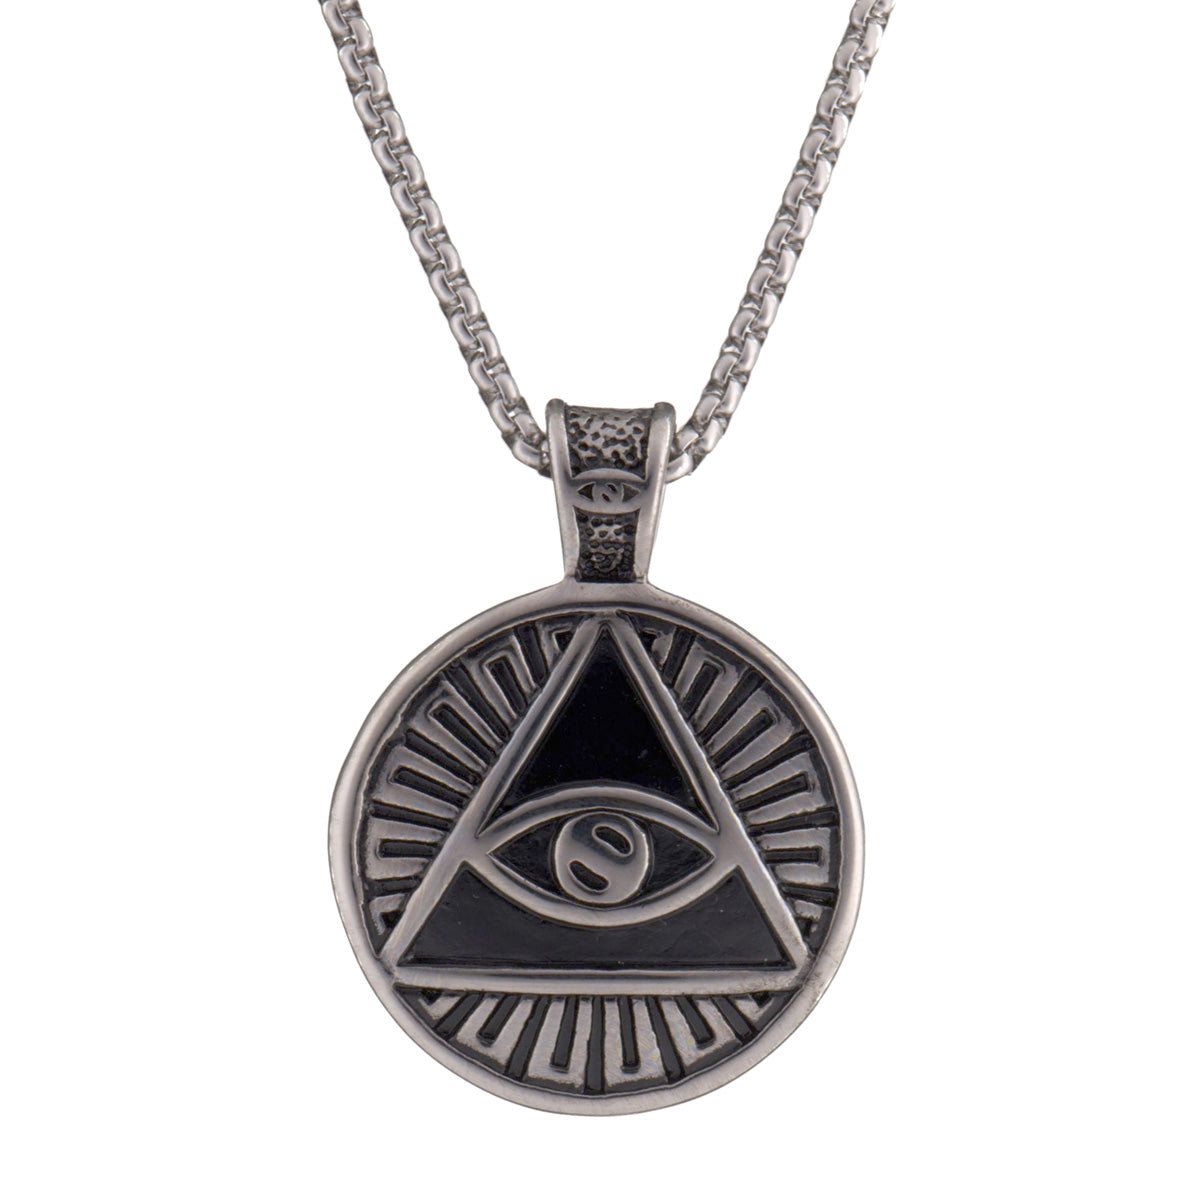 All-seeing eye pendant necklace 60cm (steel 316L)